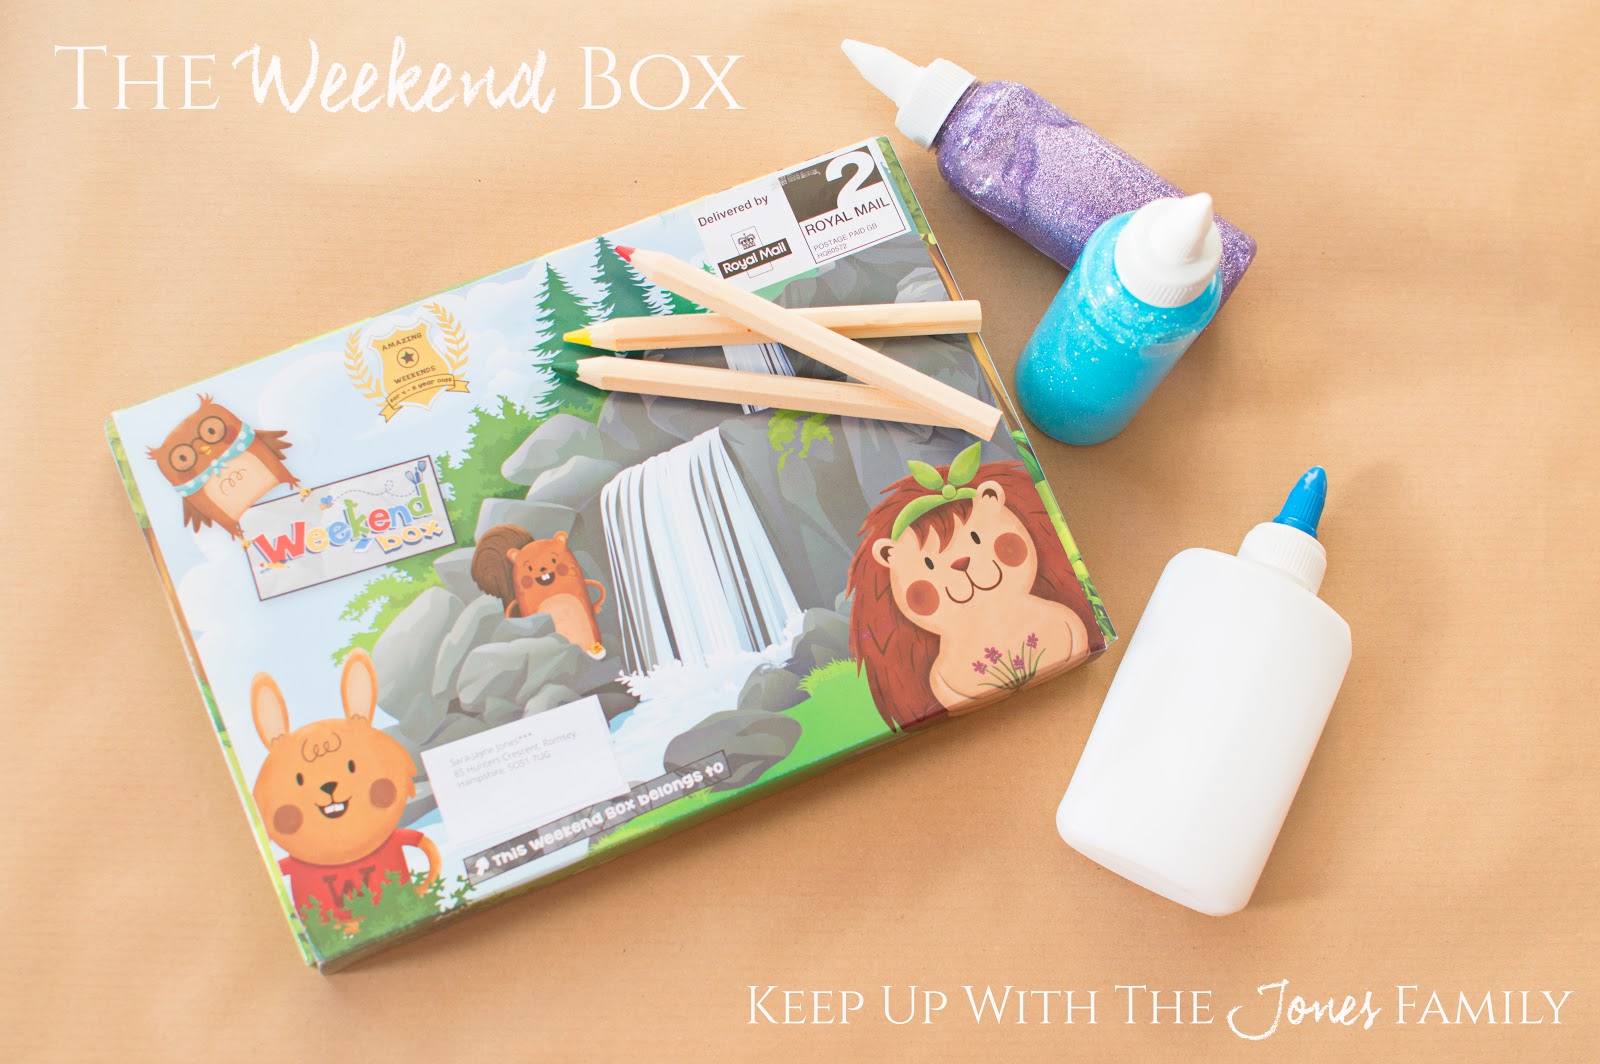 THE WEEKEND BOX SUBSCRIPTION